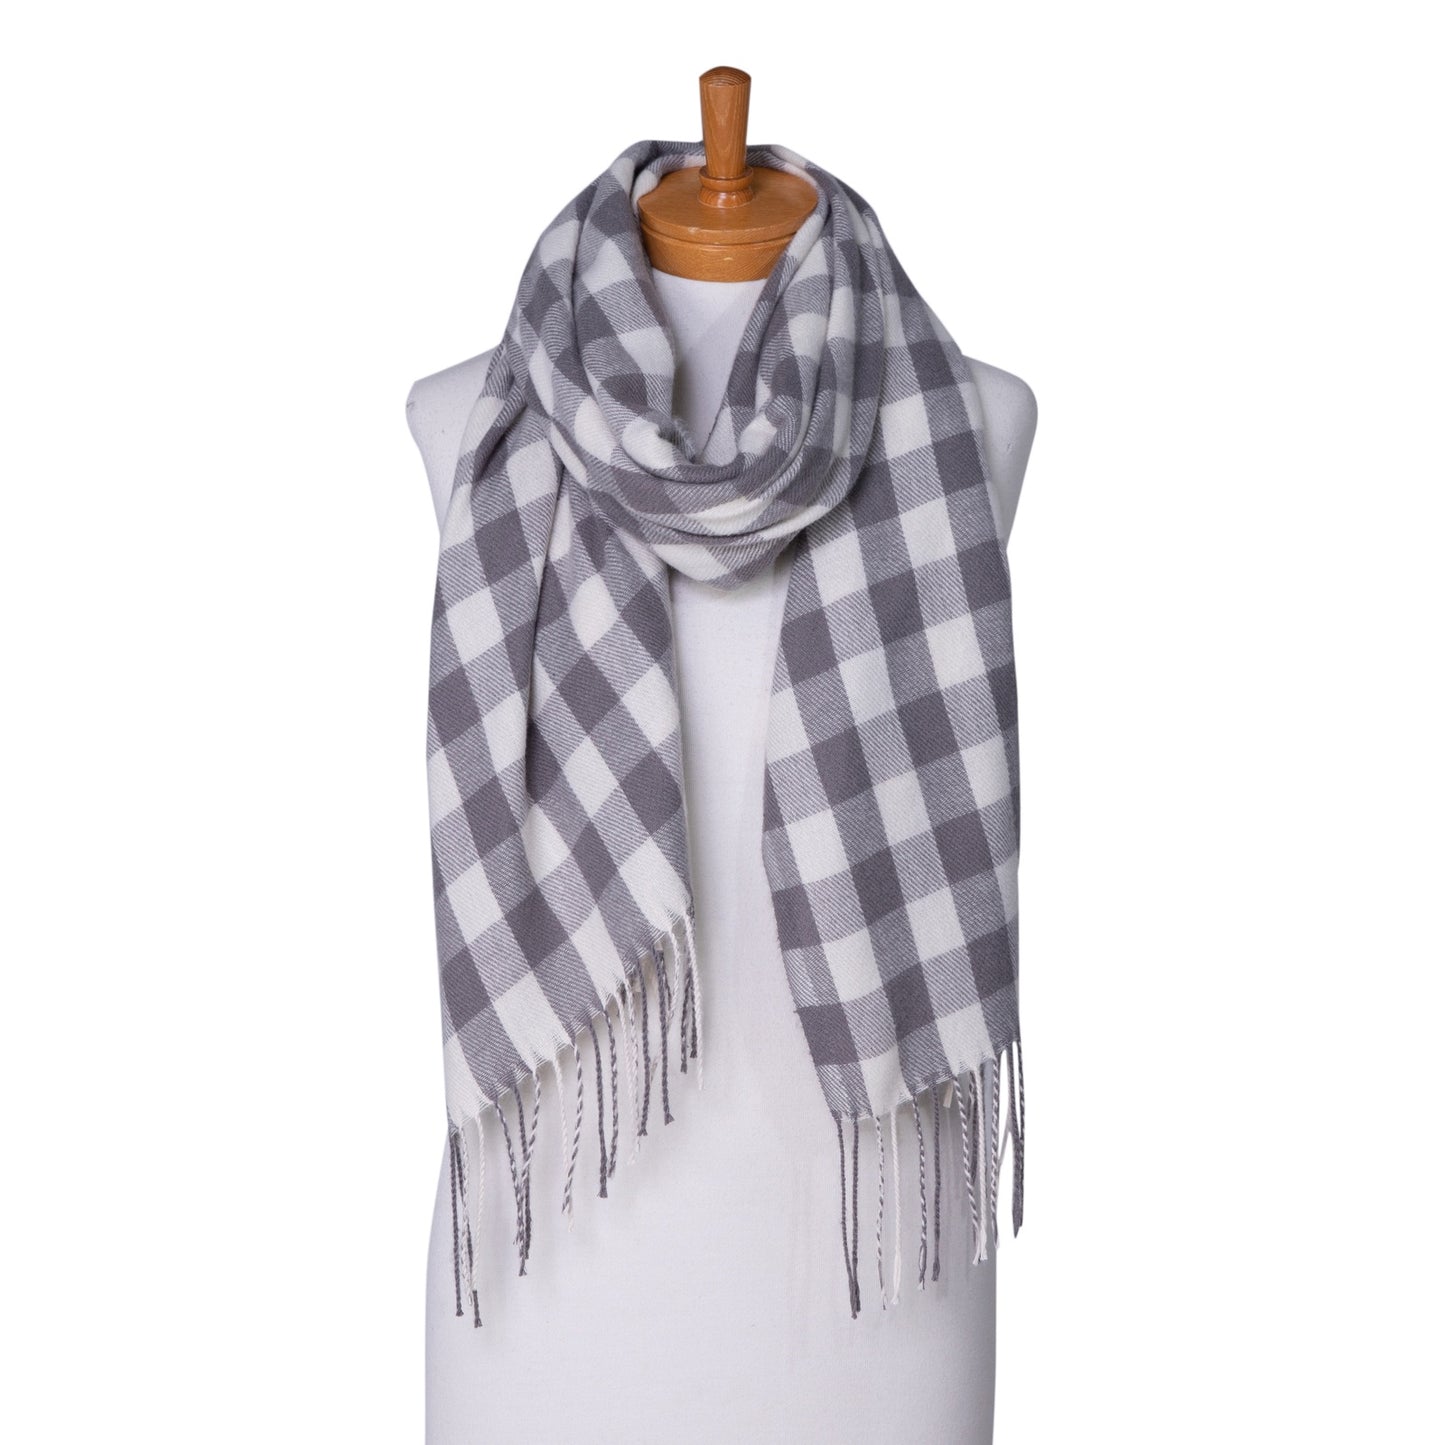 Gingham Scarf Grey and White